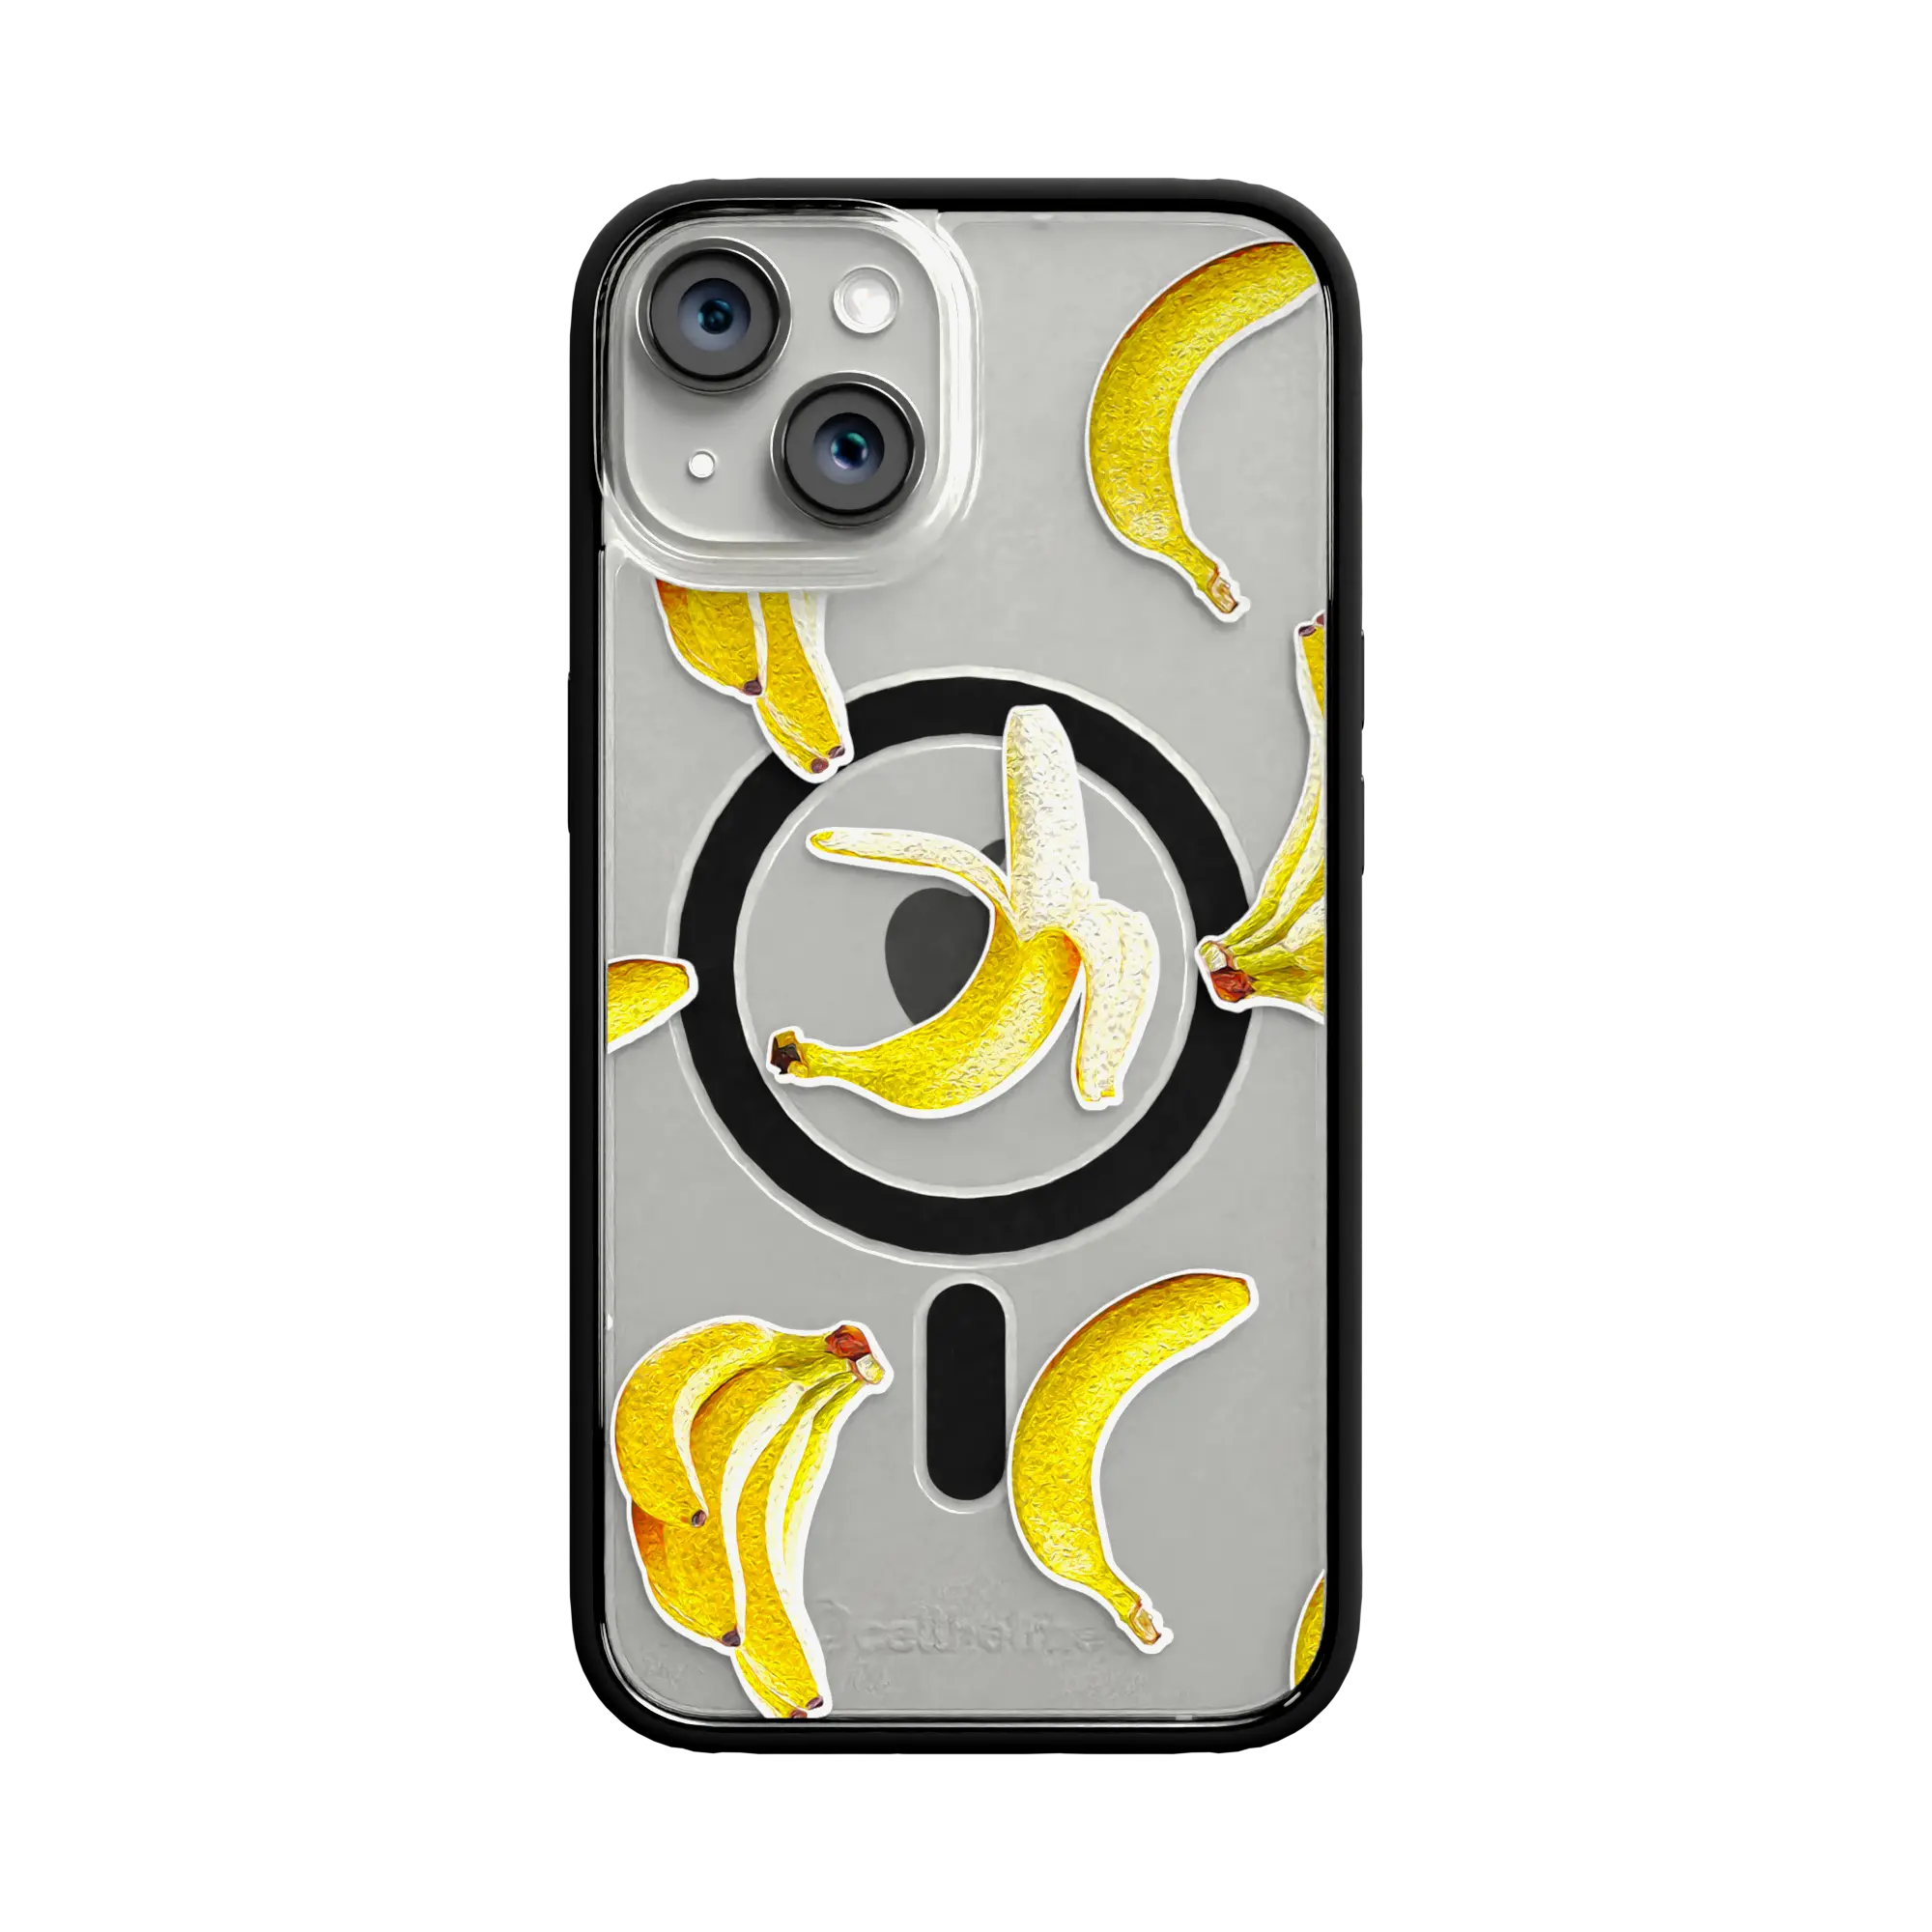 Apple-iPhone-12-12-Pro-Crystal-Clear Banana Breeze | Protective MagSafe Case | Fruits Collection for Apple iPhone 12 Series cellhelmet cellhelmet